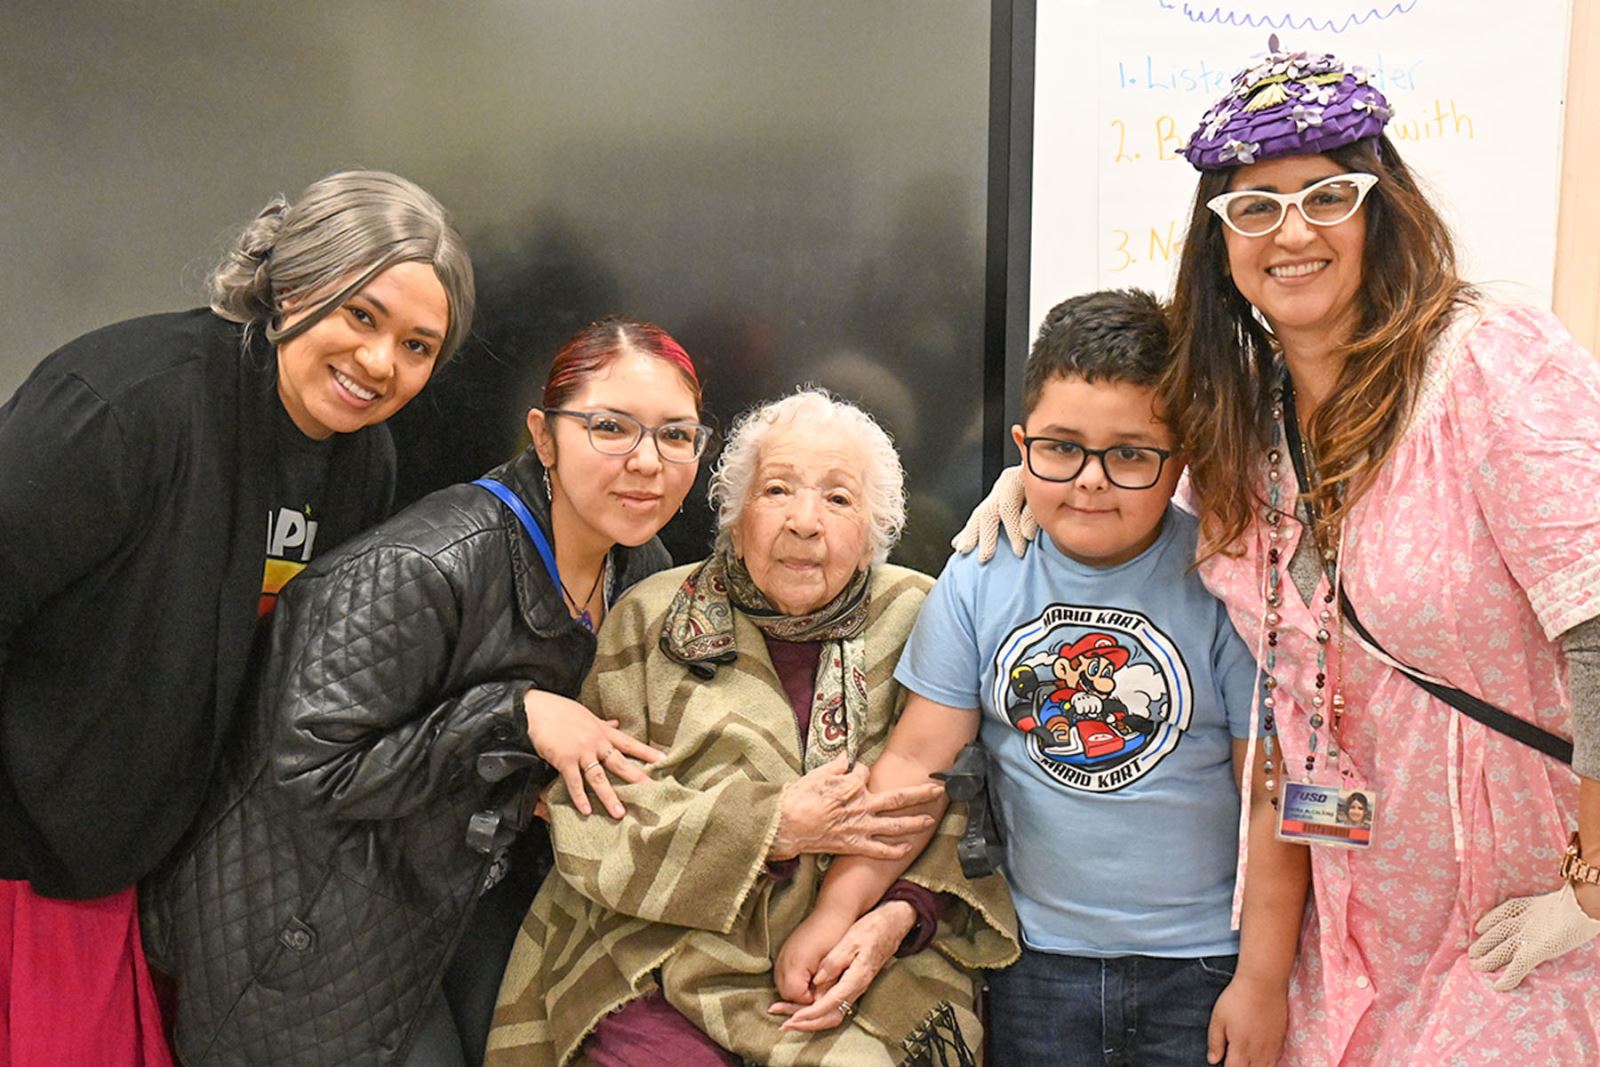 Delores Ortiz poses with teachers and a student